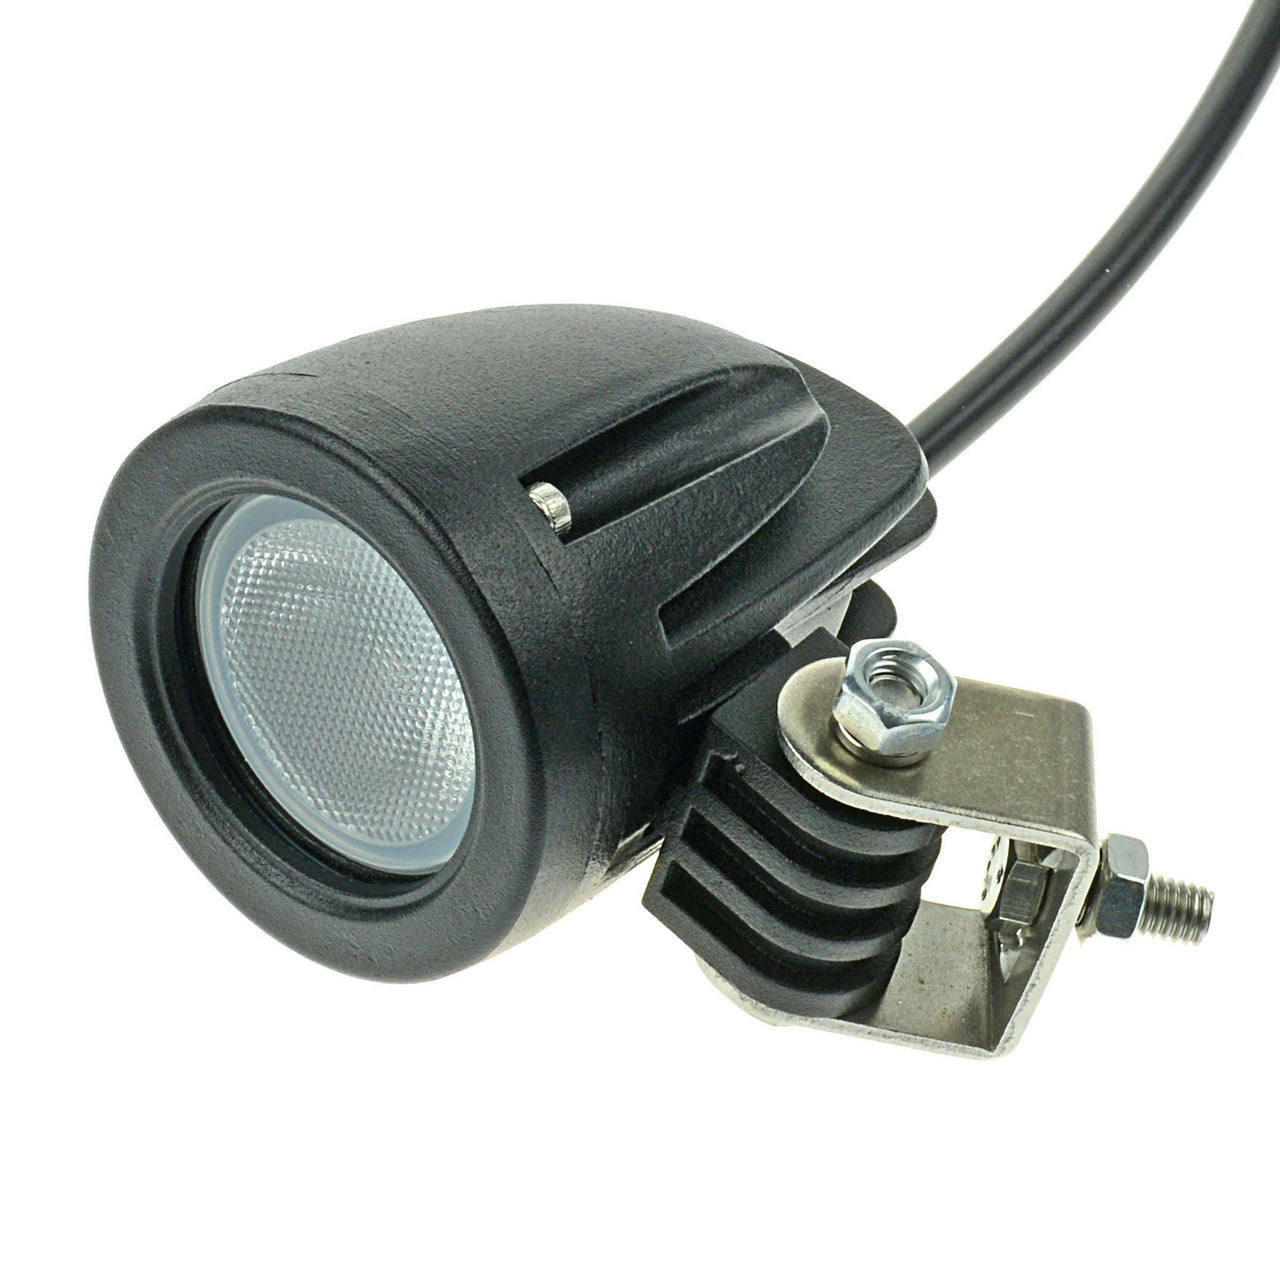 6 Types of Boat Lights Every Boater Should Know - T-H Marine Supplies